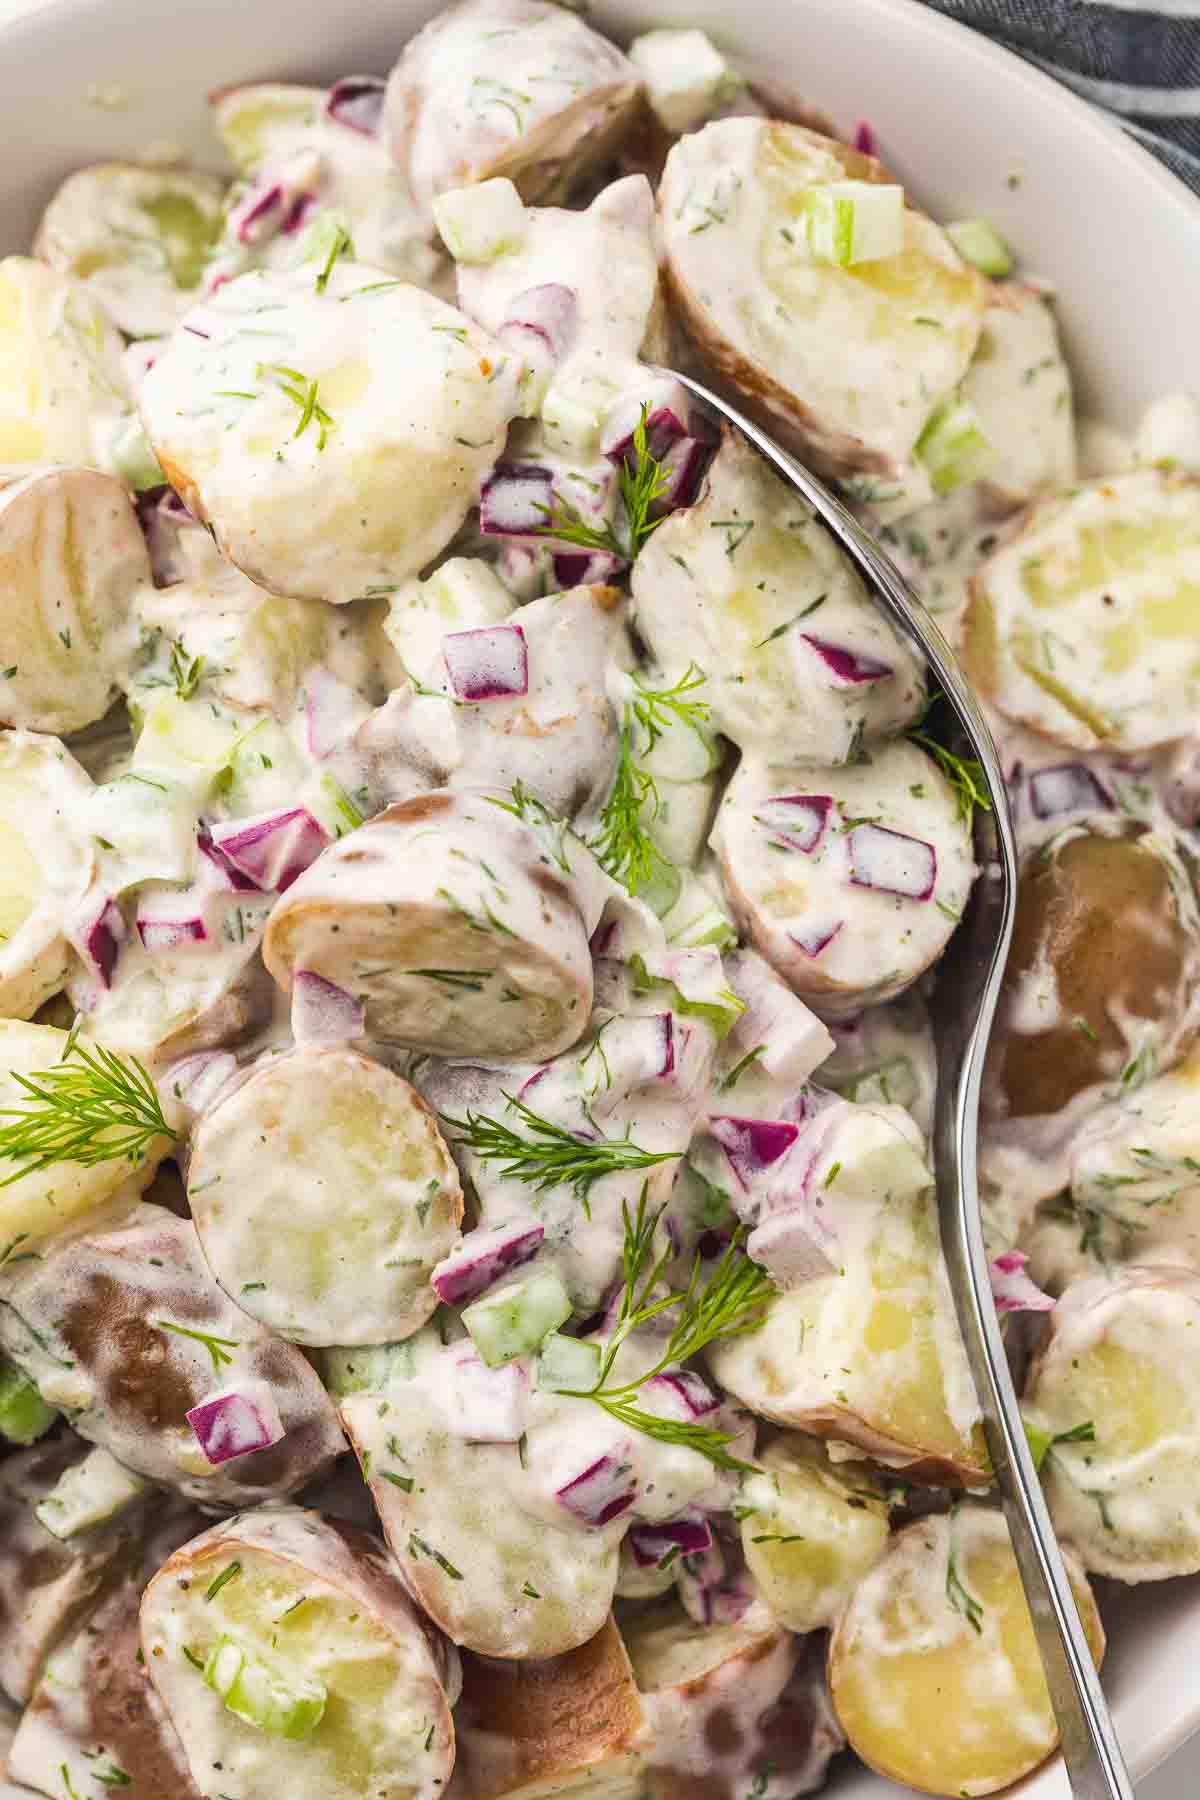 Overhead shot of red potato salad served in a white serving bowl with a serving spoon.